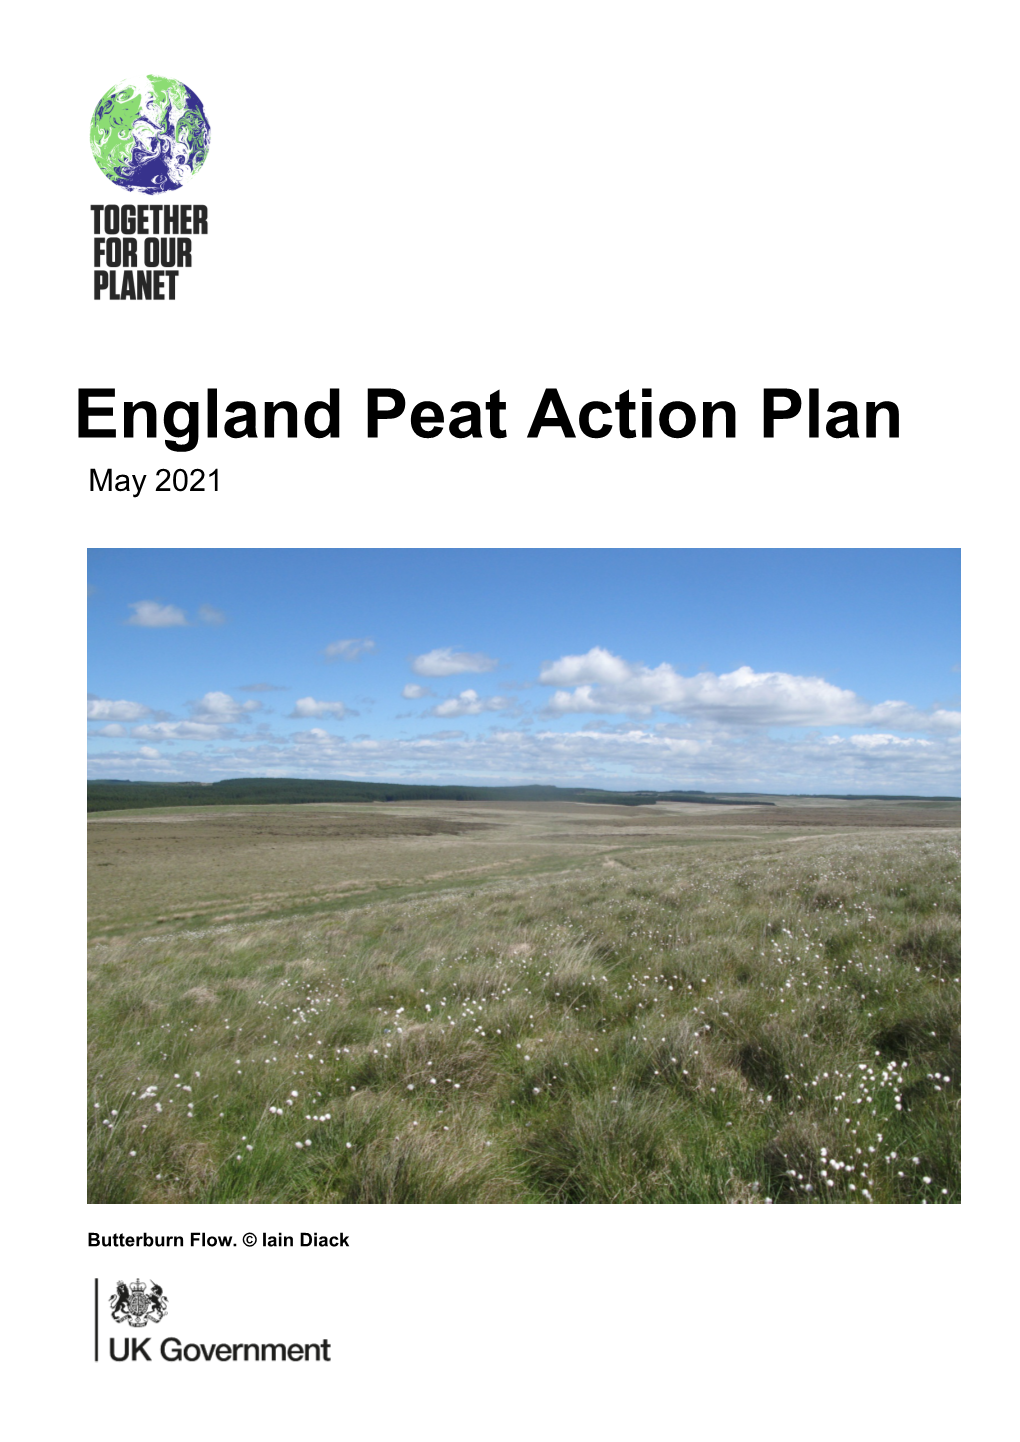 England Peat Action Plan May 2021